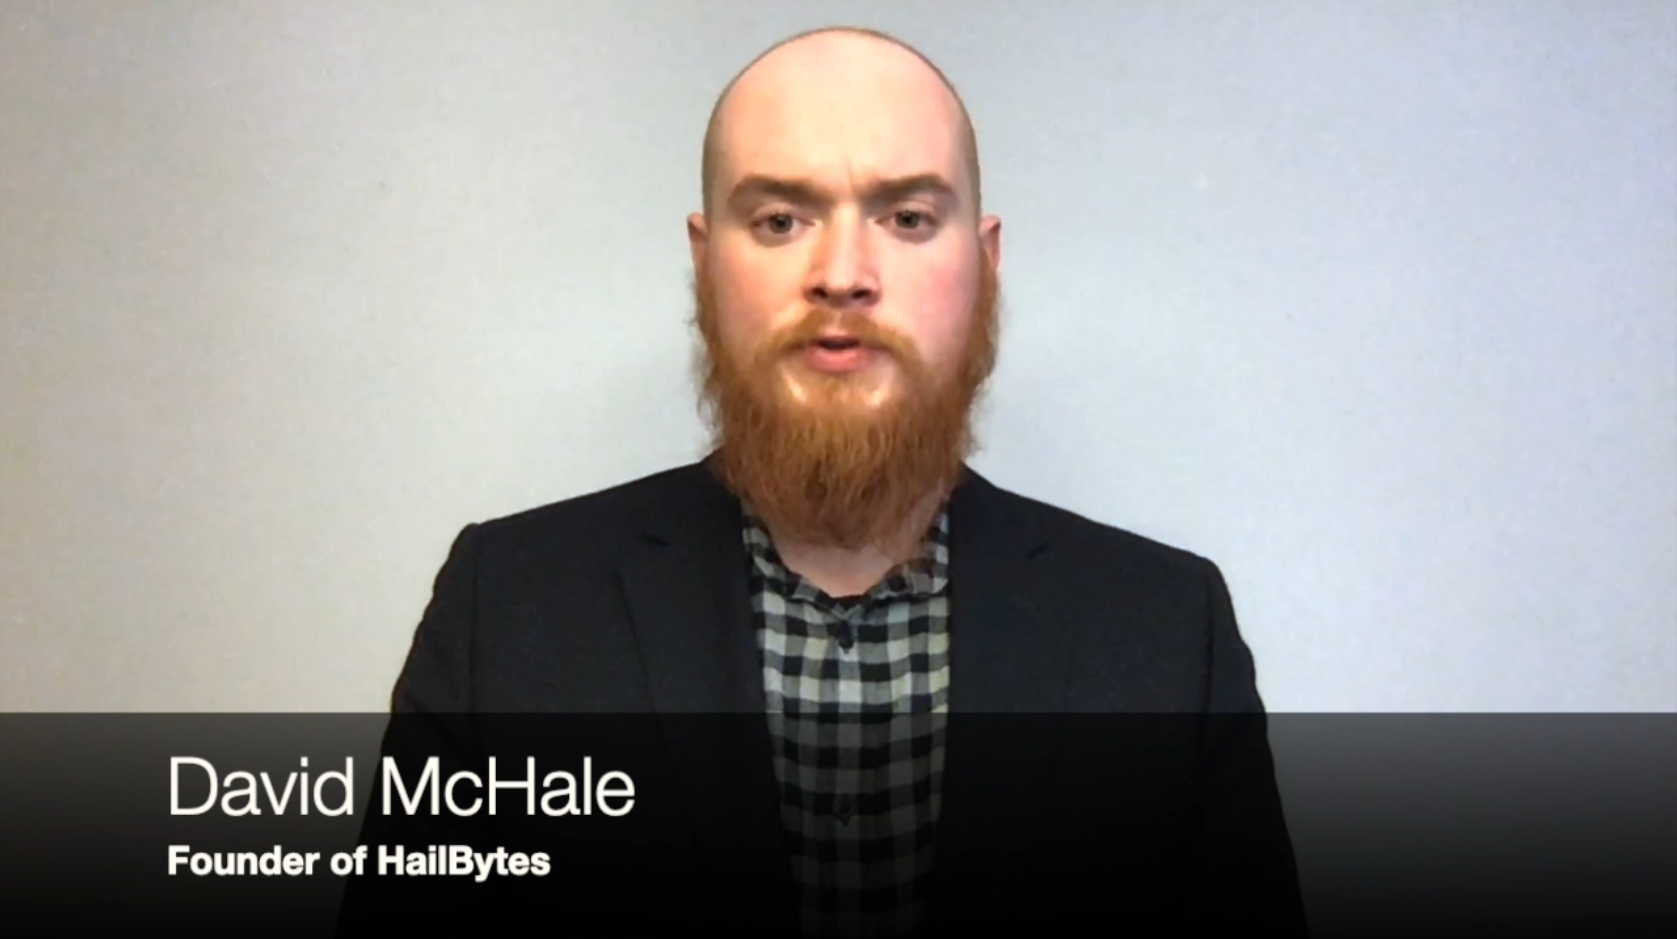 Picture of David McHale, founder of HailBytes.